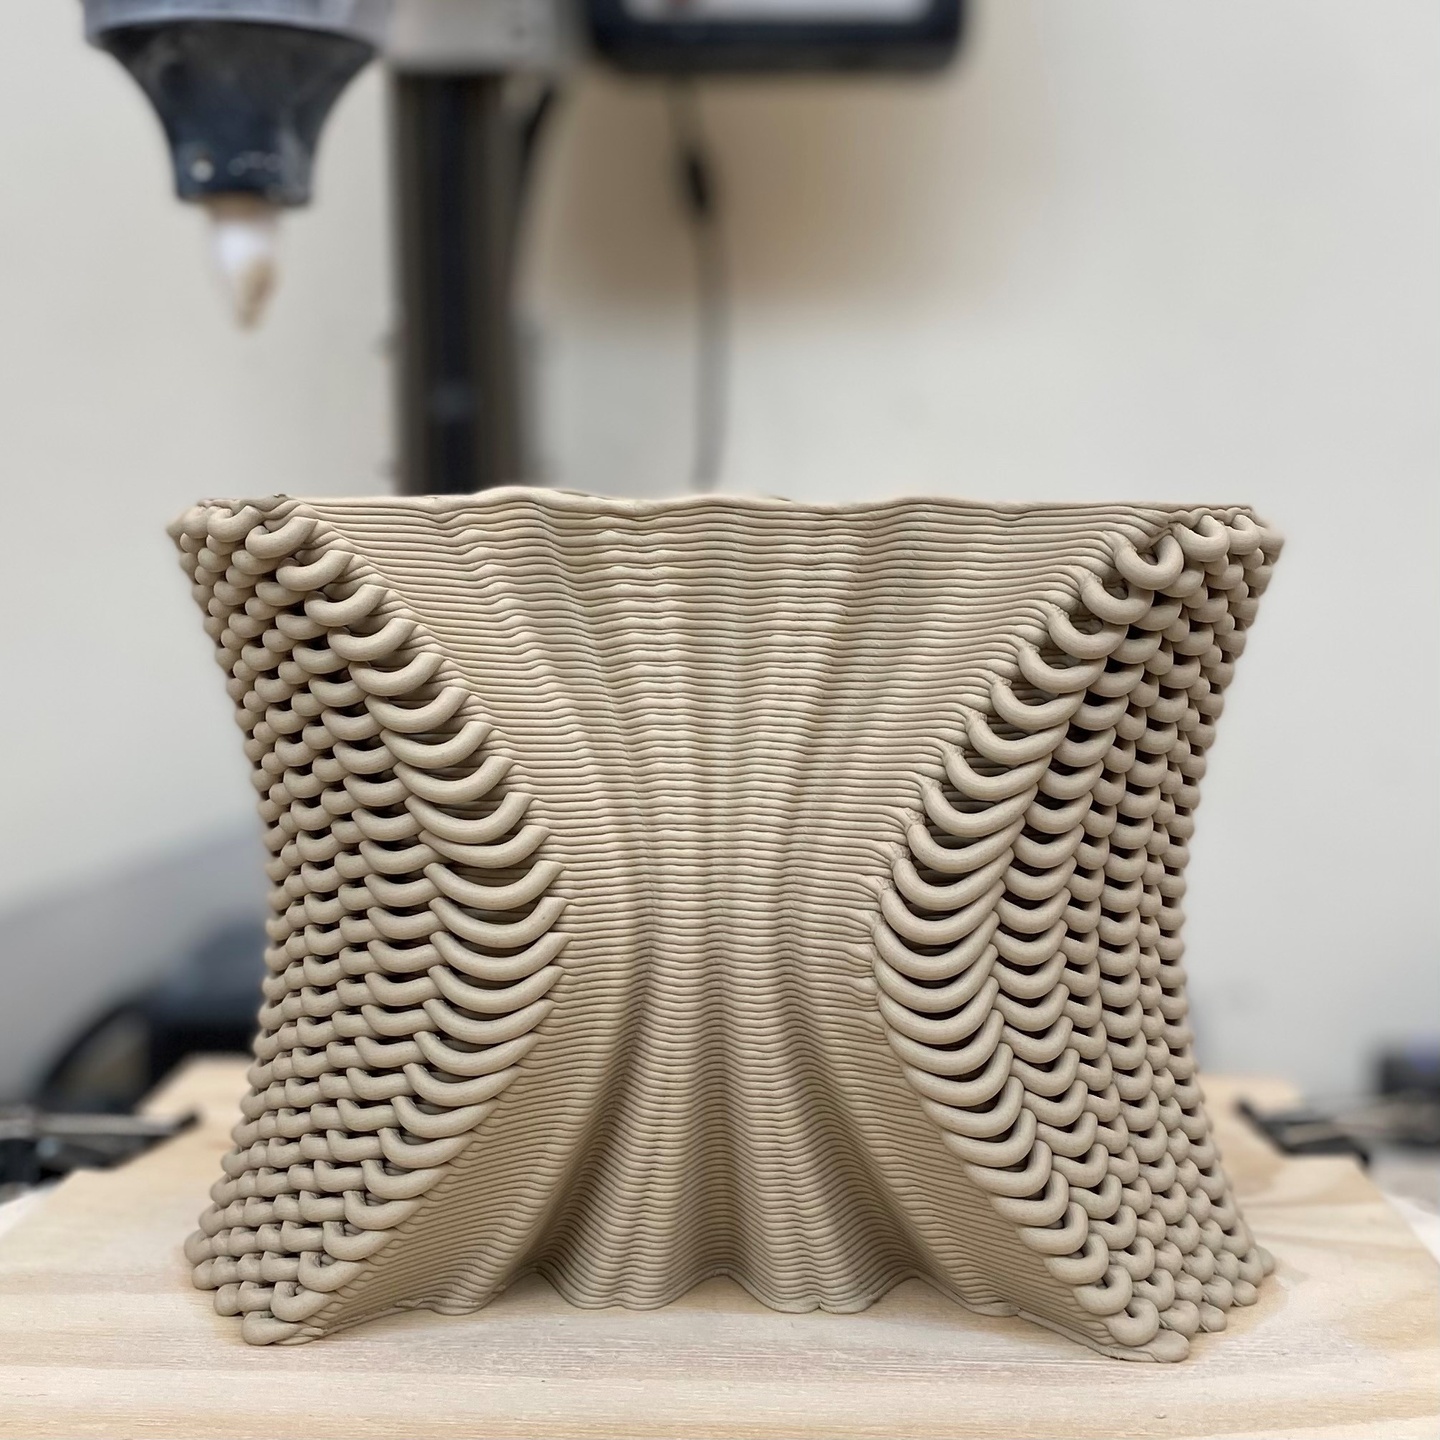 3D printed model of a segment of a masonry screen wall with a patterned, textured surface of curves.